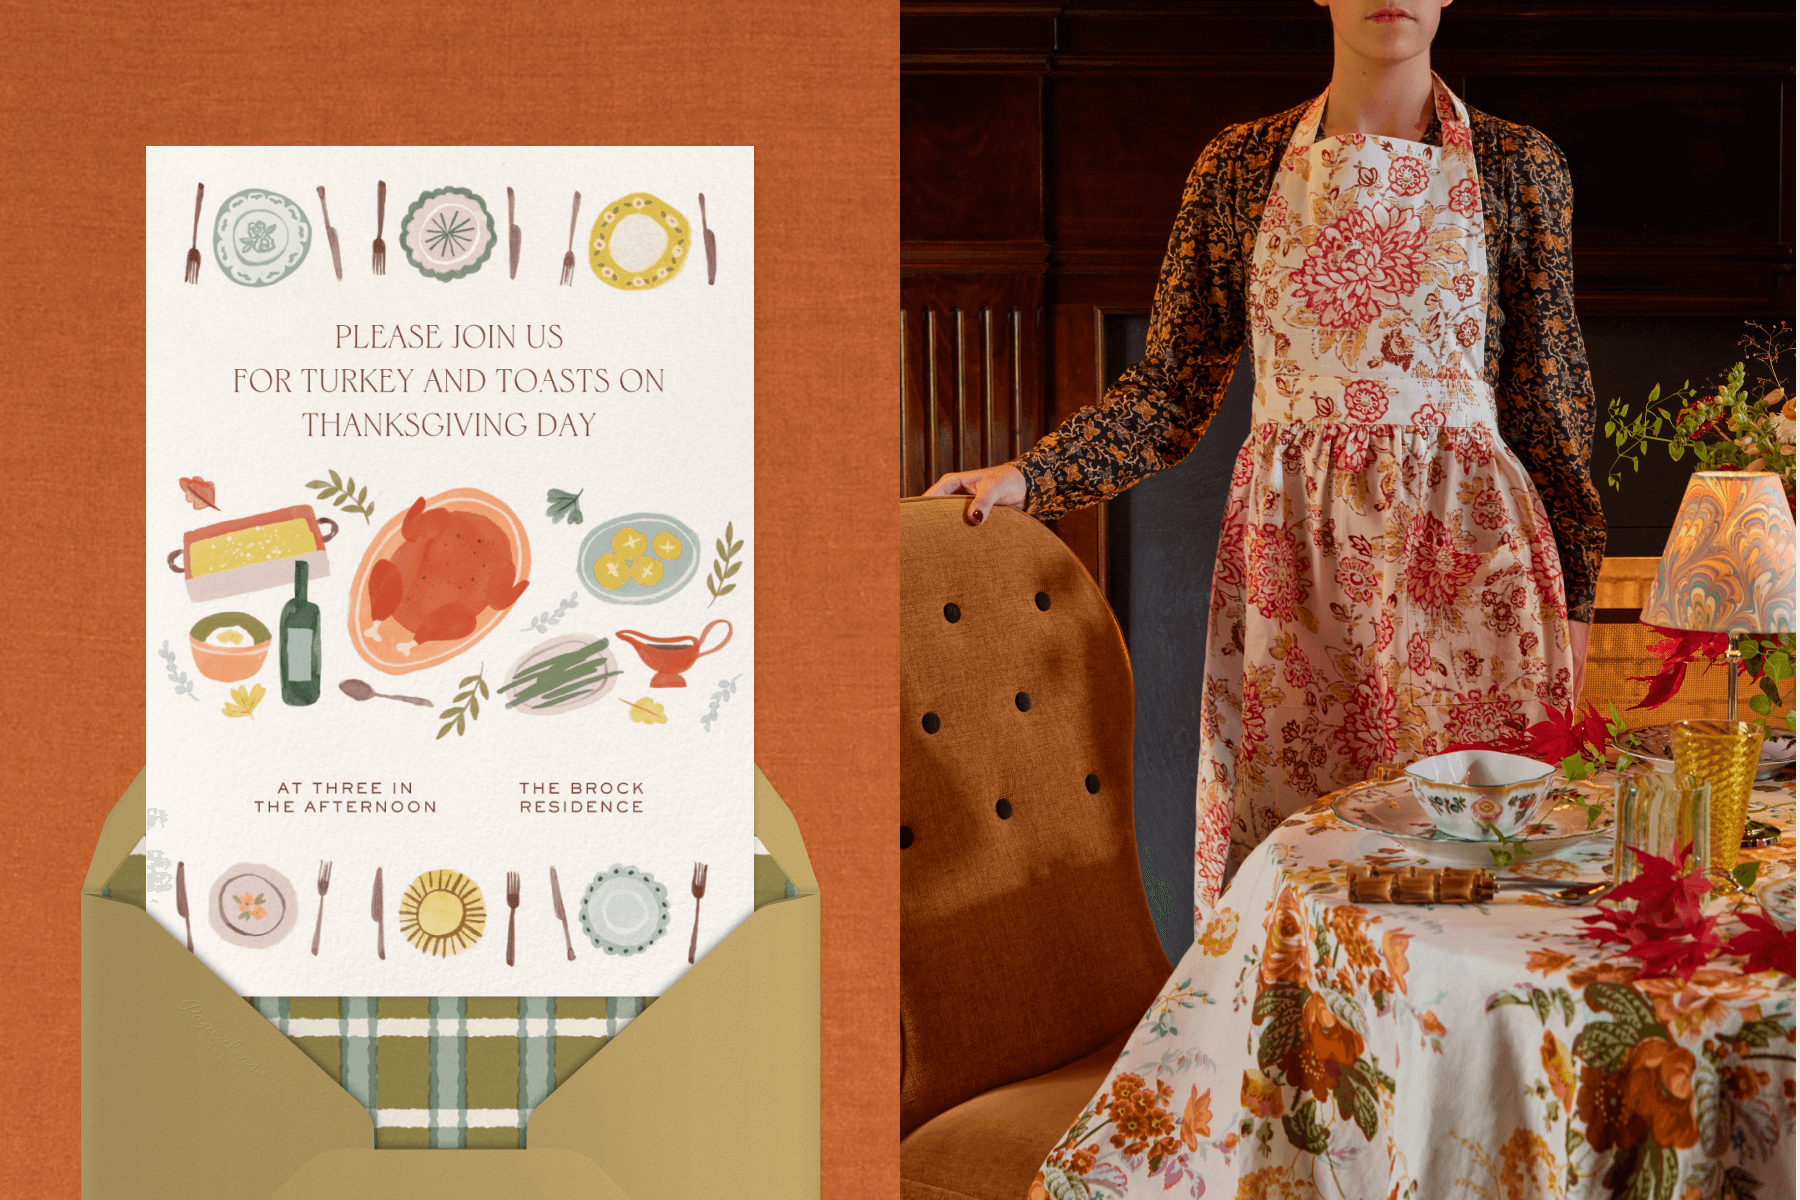 Left: A Thanksgiving invitation with colorful illustrations of food items from a Thanksgiving table, plus a border on top and bottom of ornate dishes and cuttlery. Right: A woman from the neck-down stands at a table with autumnal decor wearing a red, orange, and white floral apron and black and orange floral dress under.